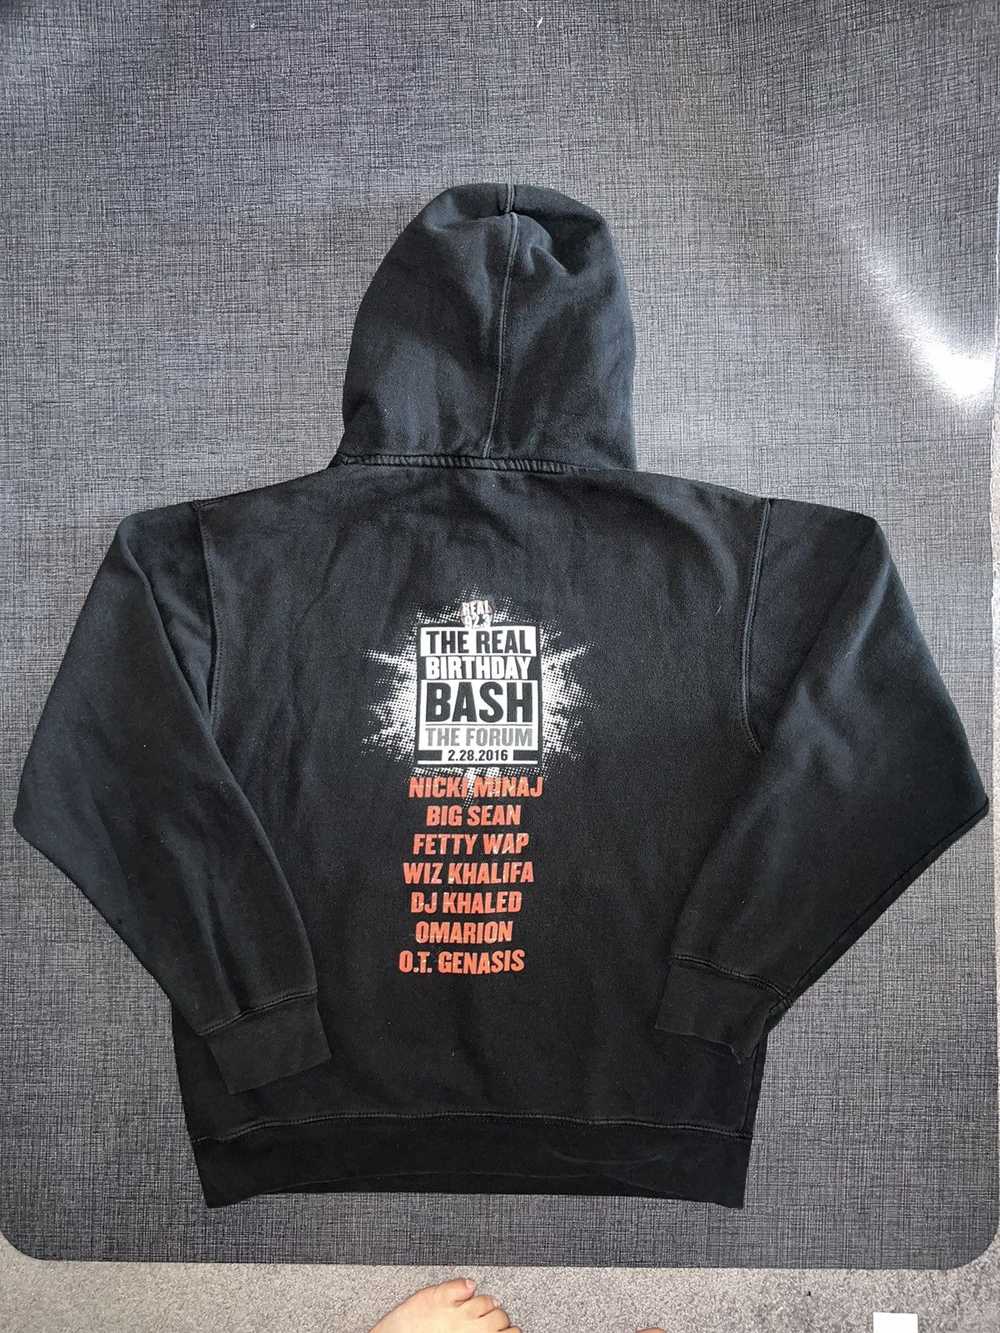 Other Rap Tour Hoodie 2016 - image 8